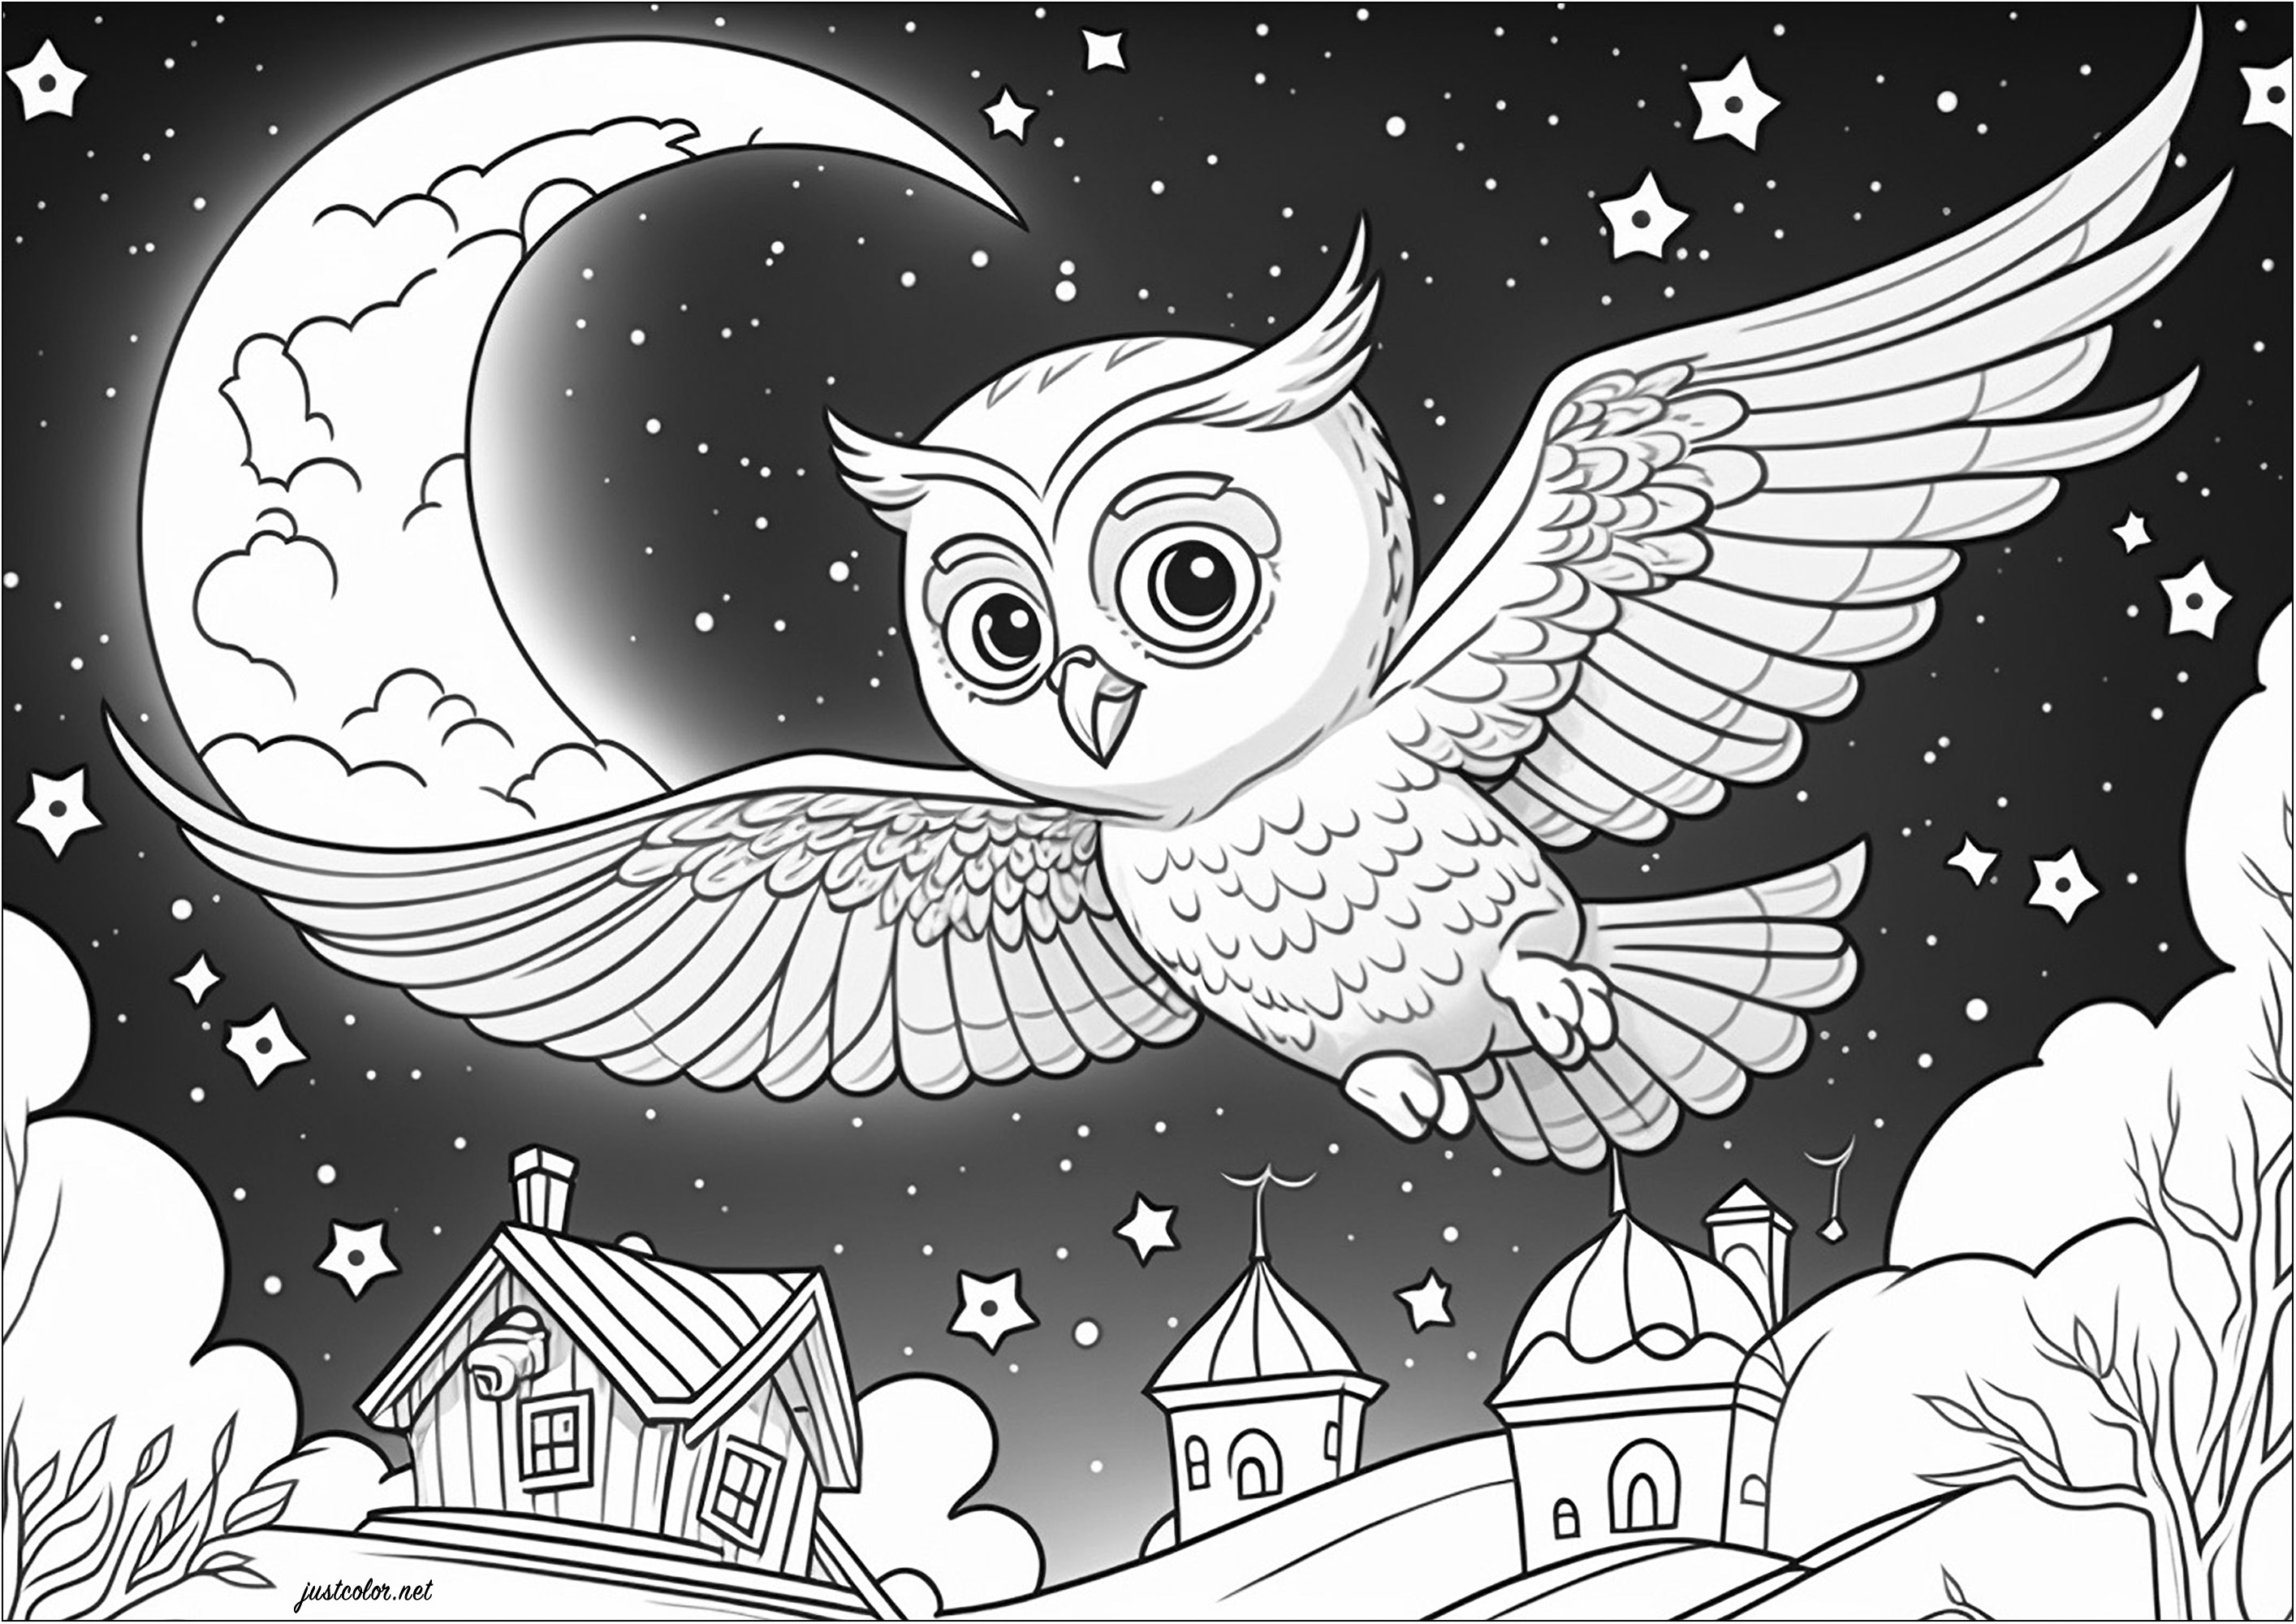 Owl and Pretty Village coloring pages. This coloring page represents a solitary owl flying over a pretty village, under a starry sky and a large moon.